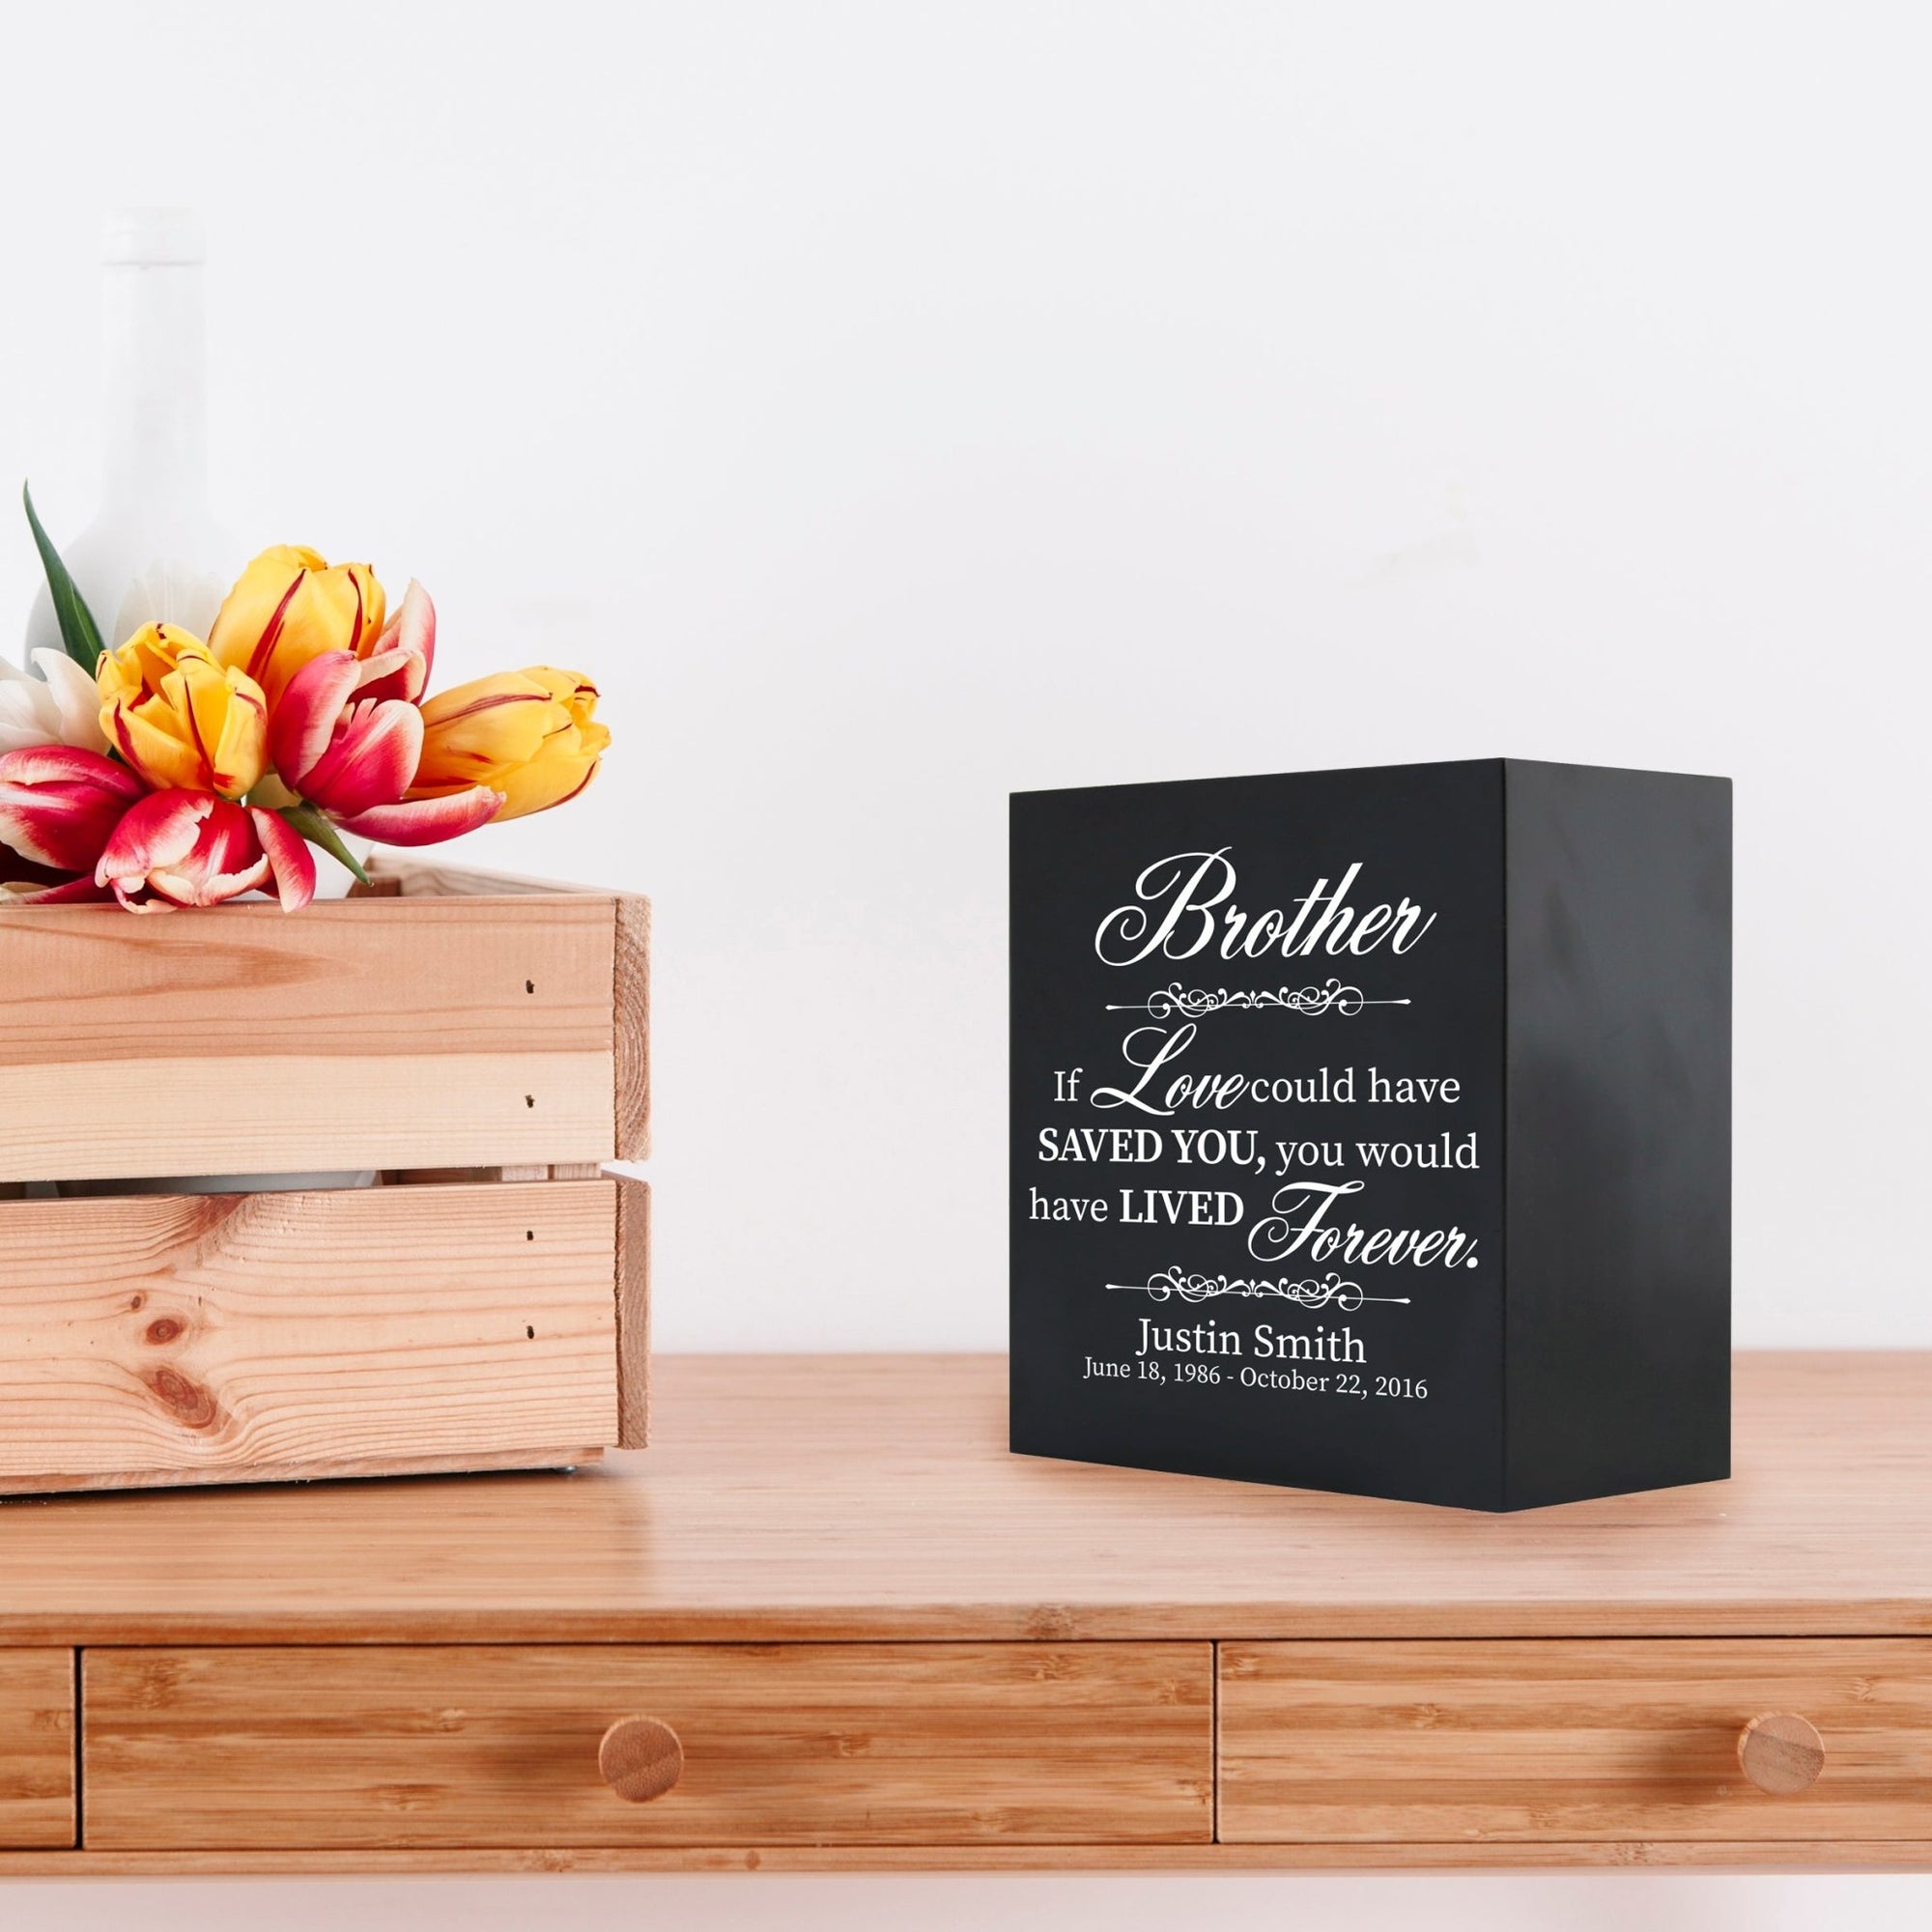 Custom Memorial 6x6 Shadow Box Urn Brother, If Love Could holds 53 cu in - LifeSong Milestones